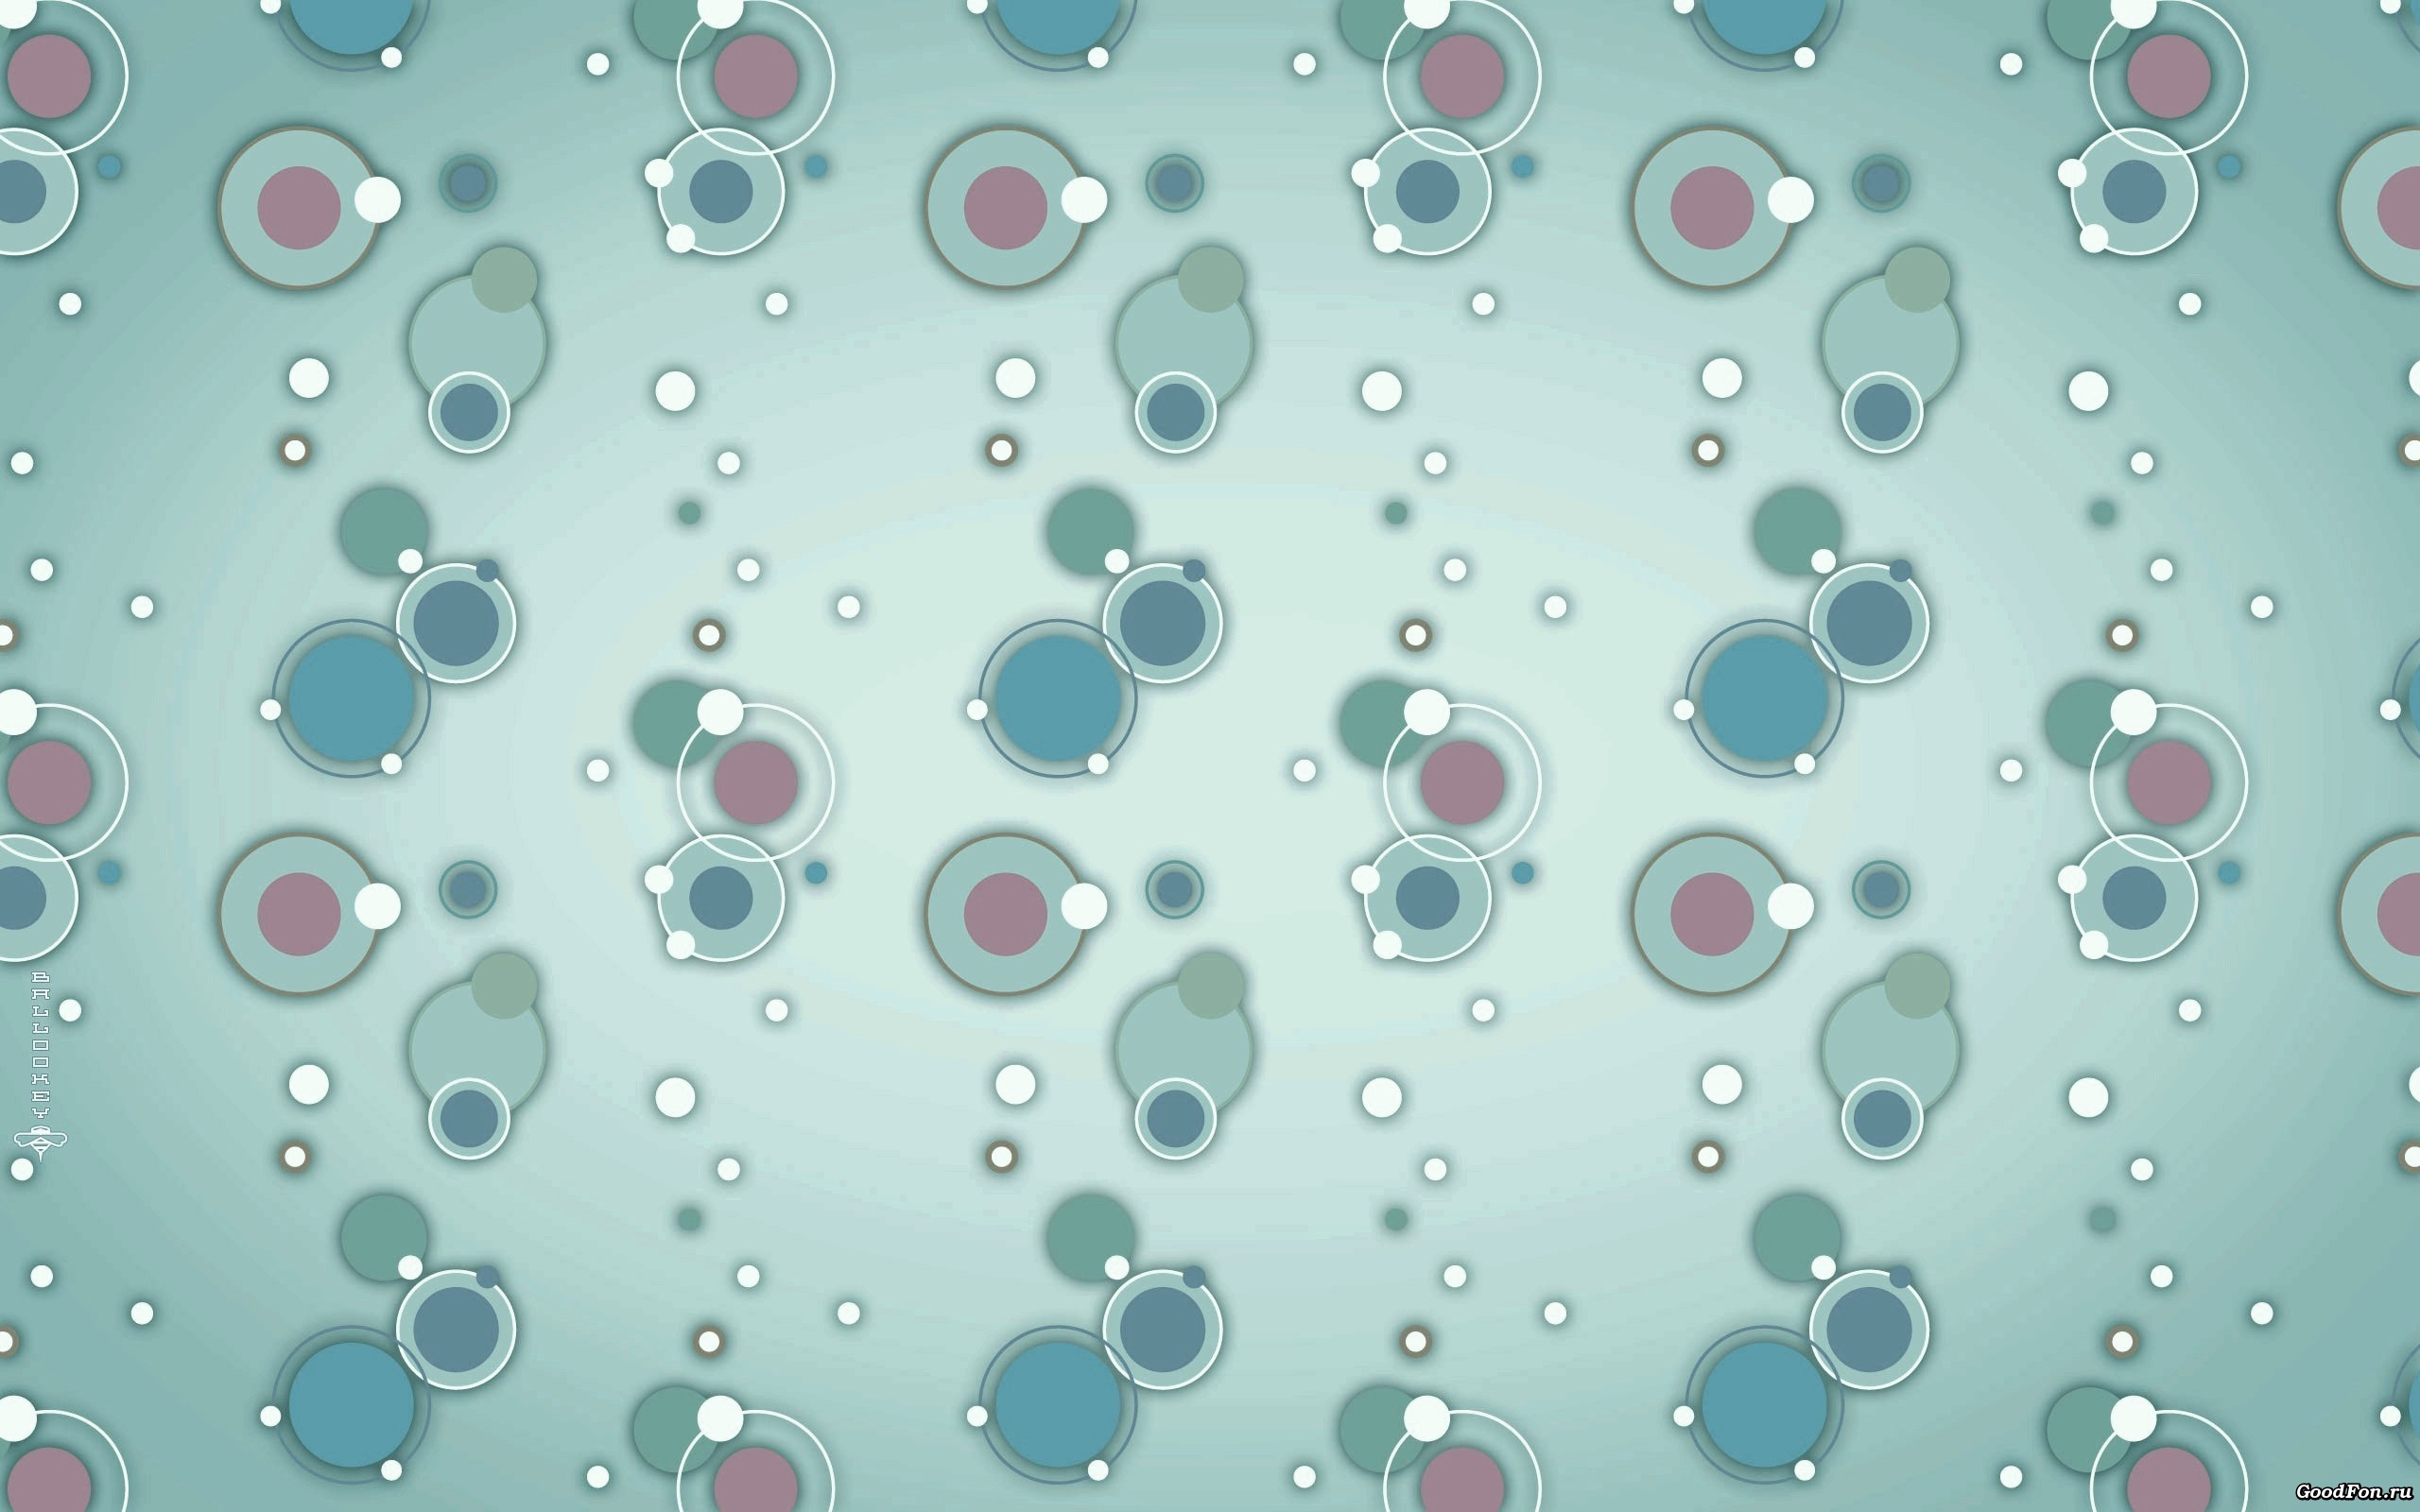 Abstract Polka Dots backgrounds